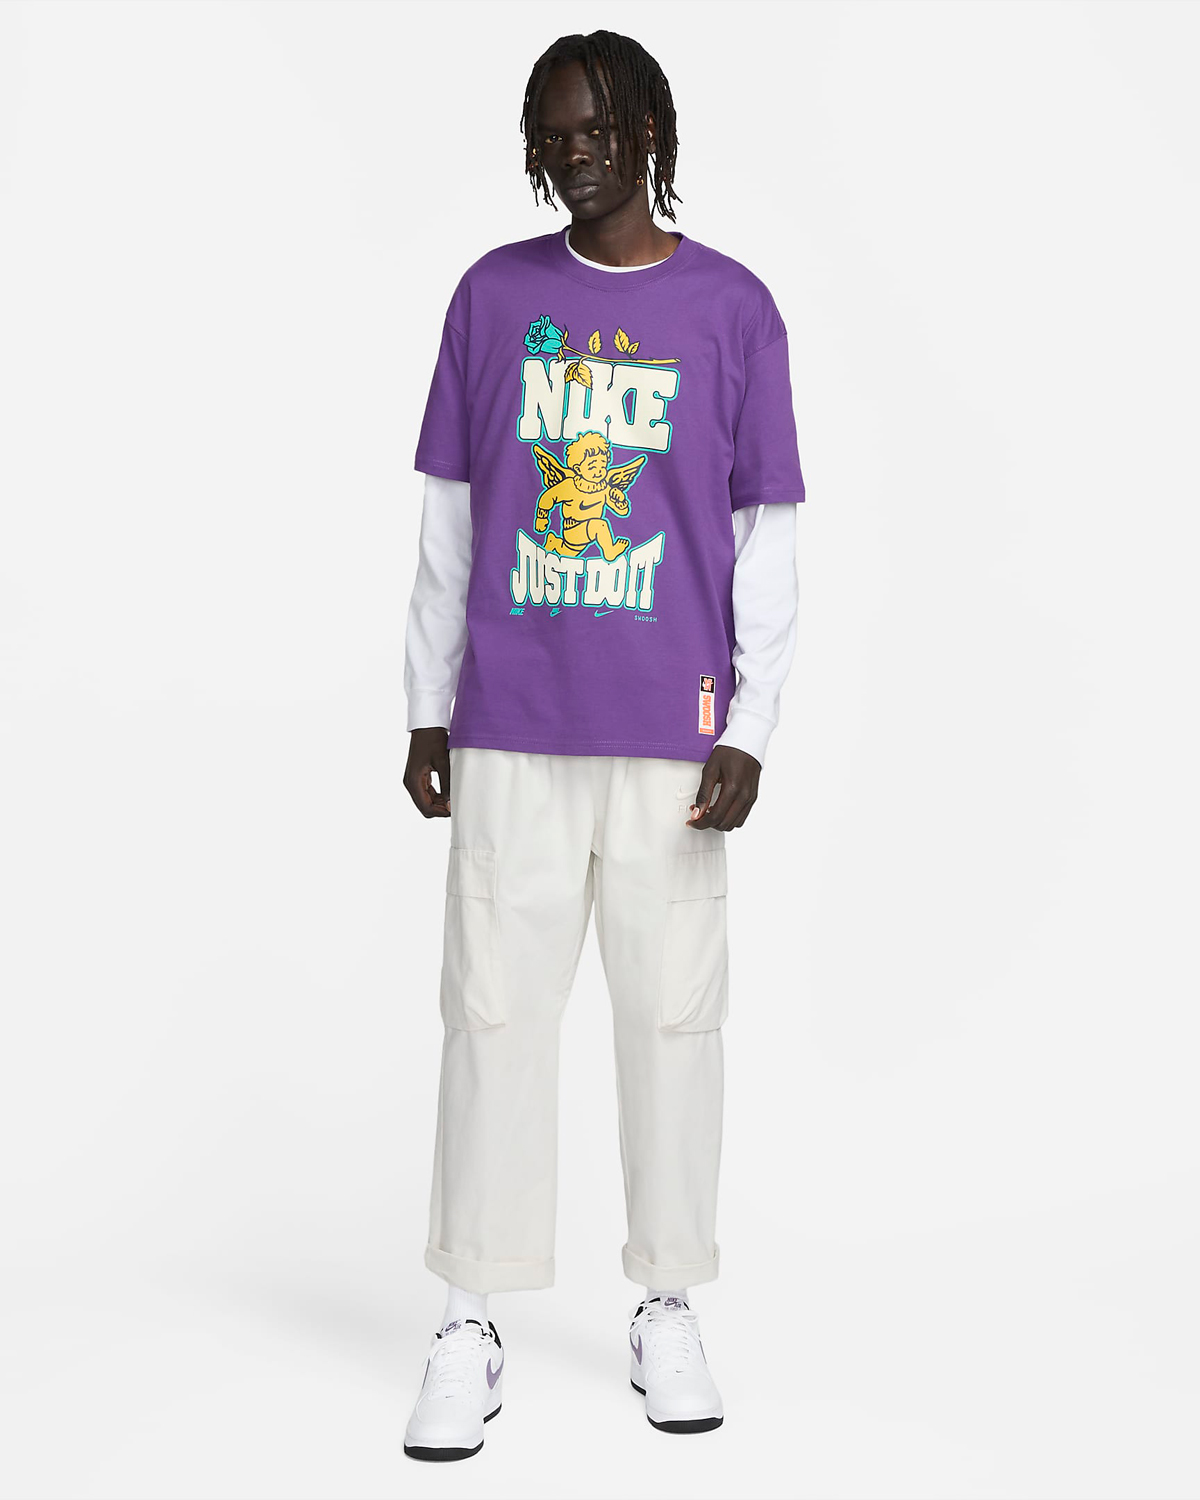 Nike-Sportswear-Max90-T-Shirt-Purple-Cosmos-Outfit